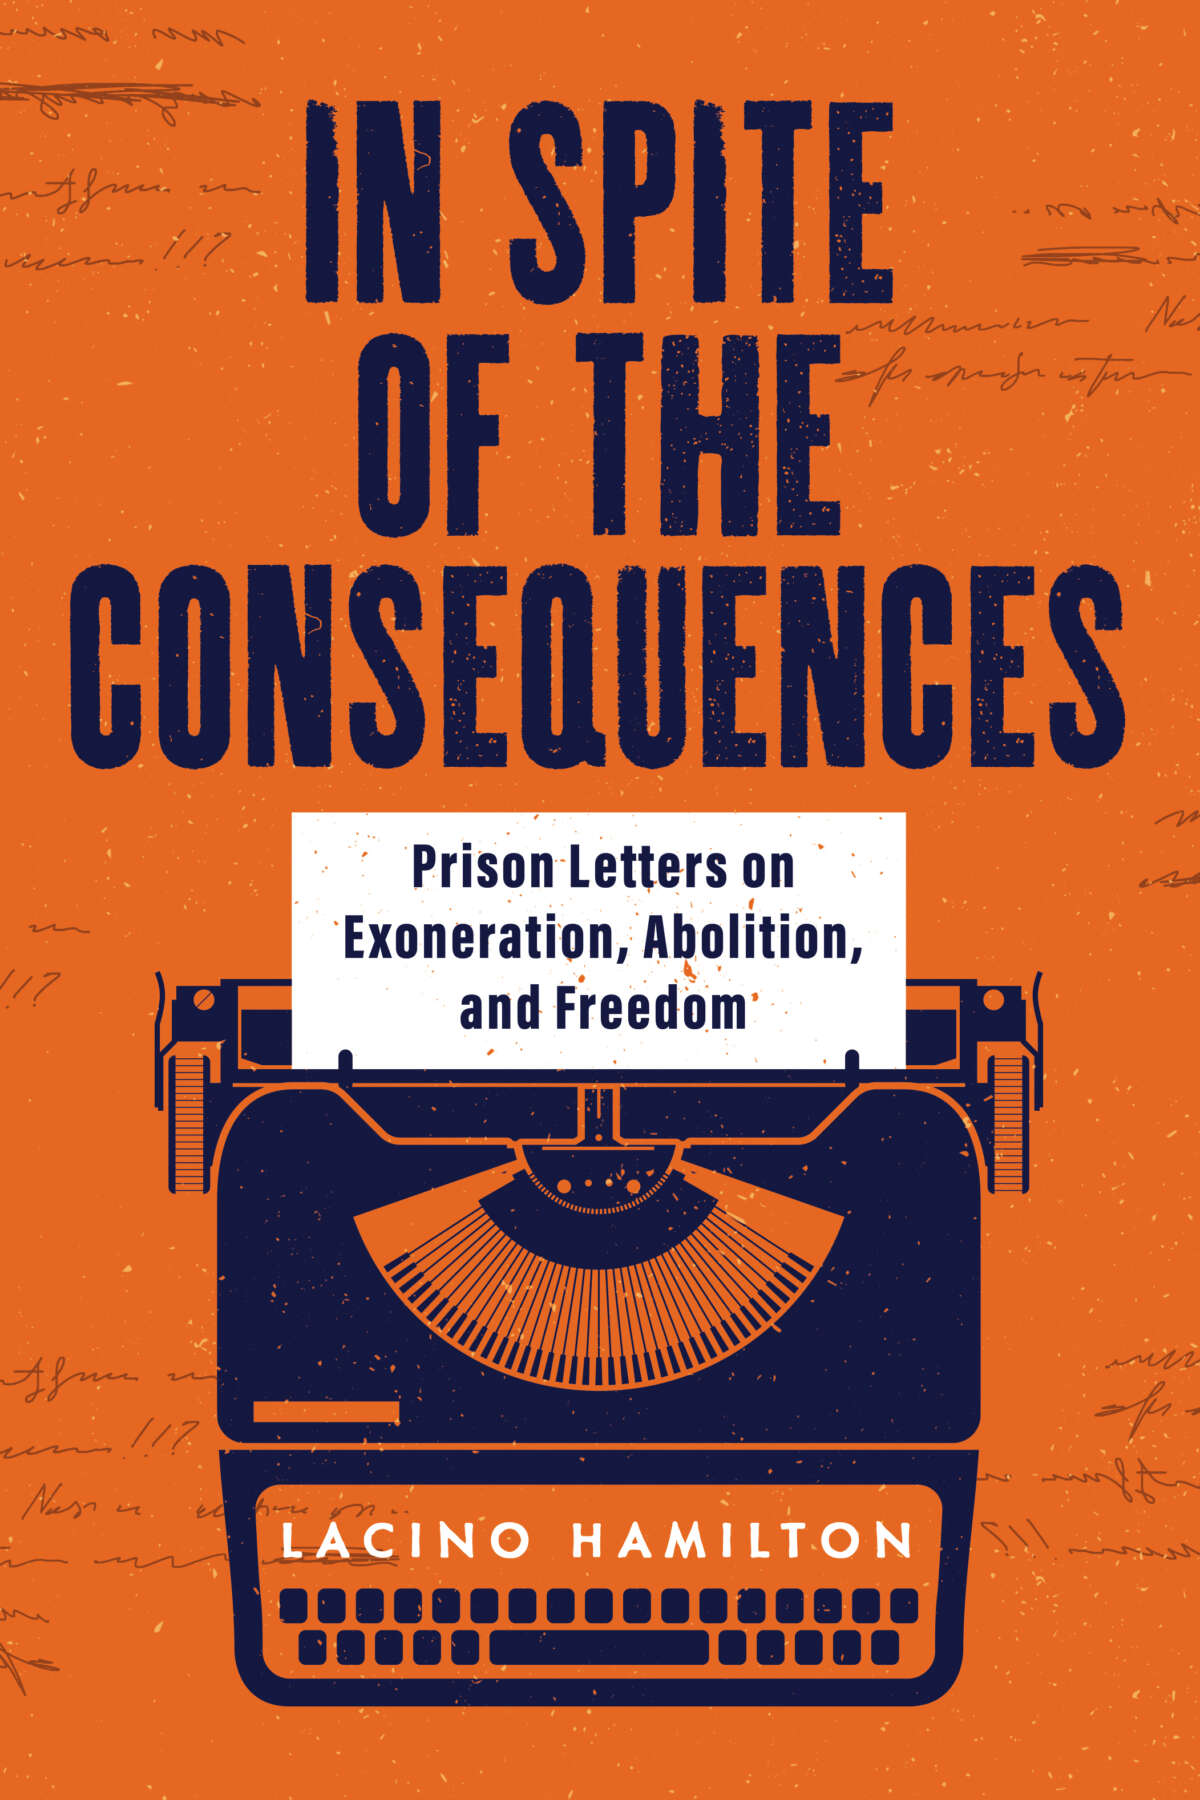 In Spite of the Consequences: Prison Letters on Exoneration, Abolition, and Freedom - by Lacino Hamilton - book cover with typwriter and orange background with handwriting